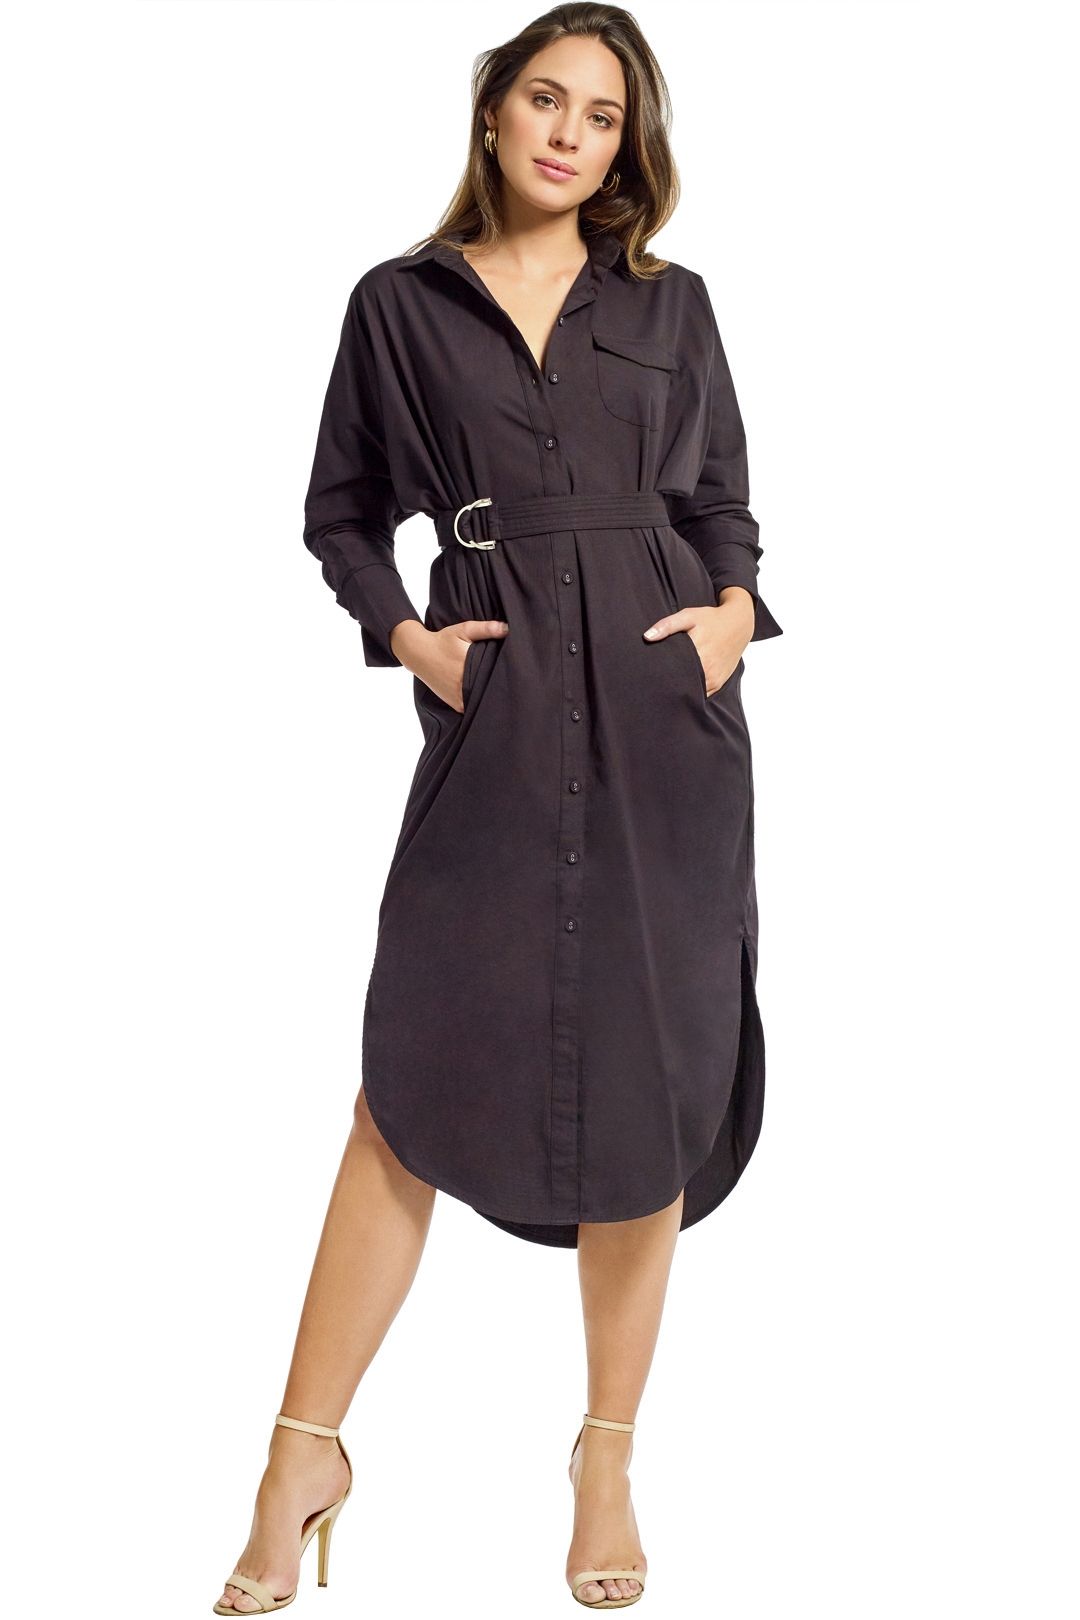 Cmeo Collective - Petition Shirt Dress - Black - Front